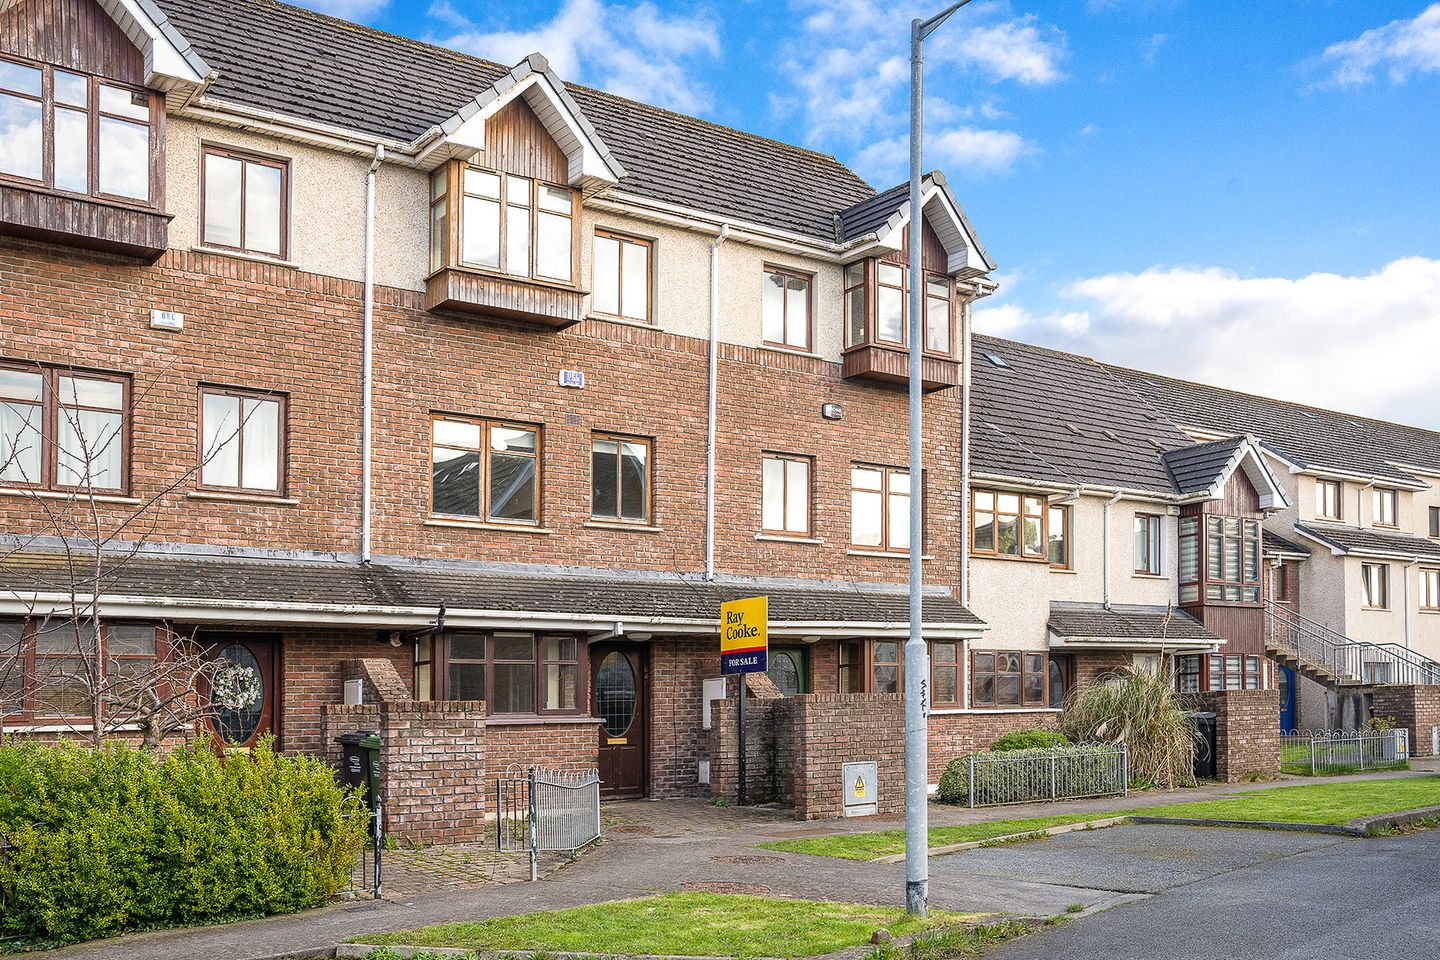 64 Griffin Rath Hall, Maynooth, Co. Kildare